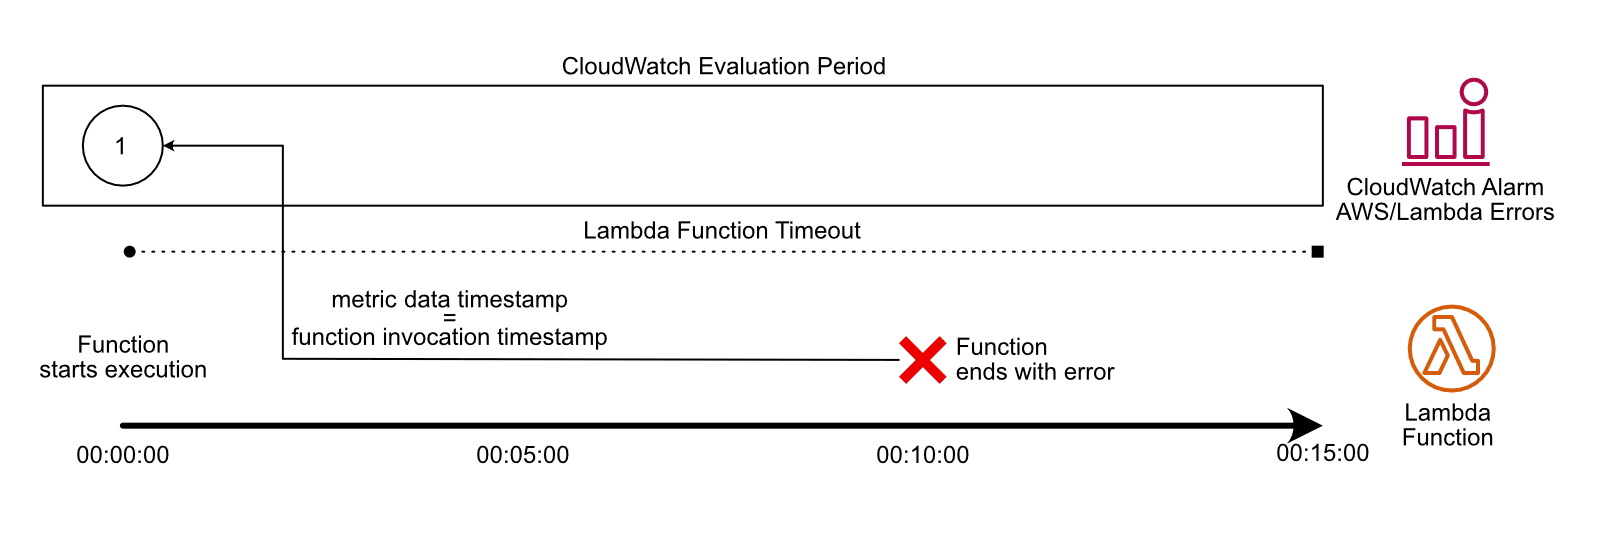 CloudWatch alarm monitoring a Lambda function: CloudWatch Evaluation Period must cover at least the Function Timeout Period